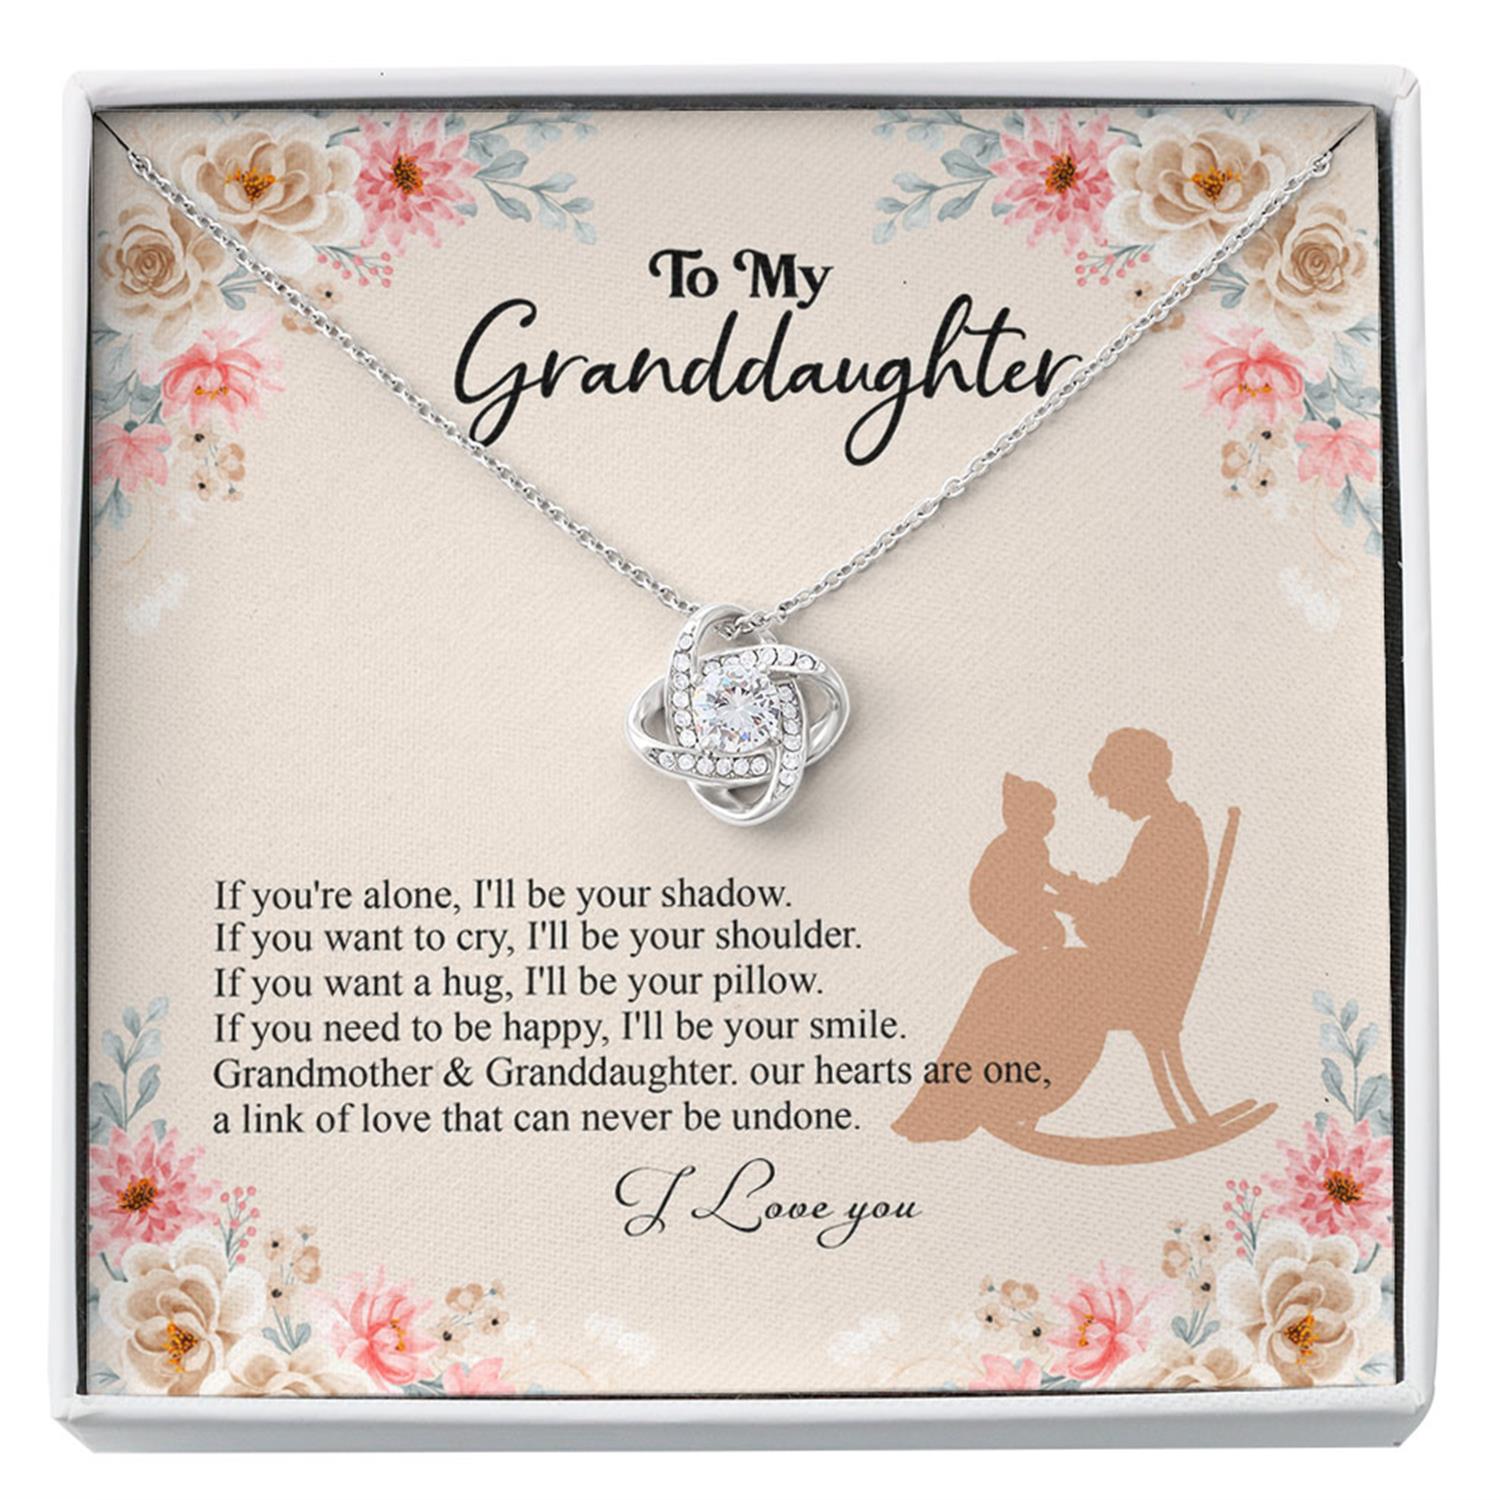 Granddaughter Necklace, Granddaughter Necklace, Gifts For Granddaughter, To My Granddaughter Custom Necklace